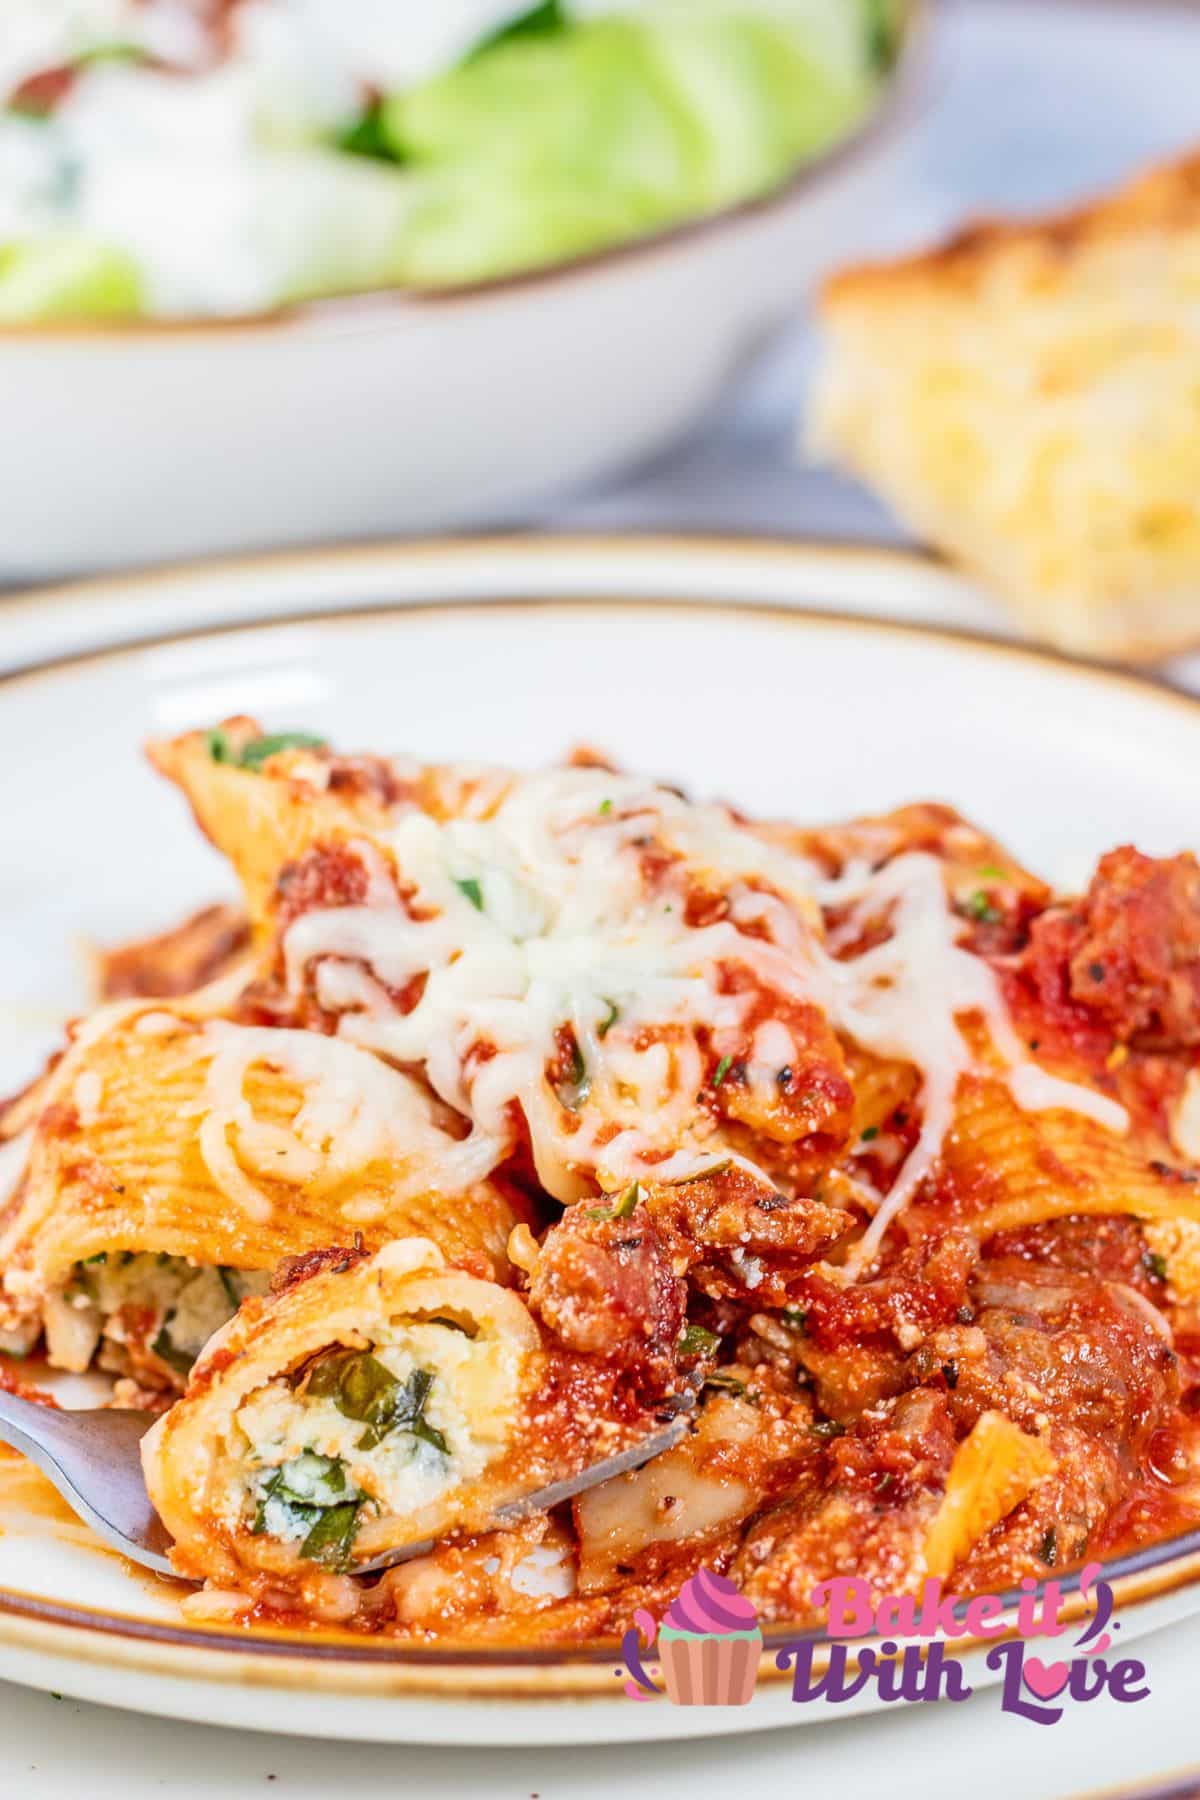 Flavorful, hearty baked stuffed shells plated with salad and crusty French bread in the background.